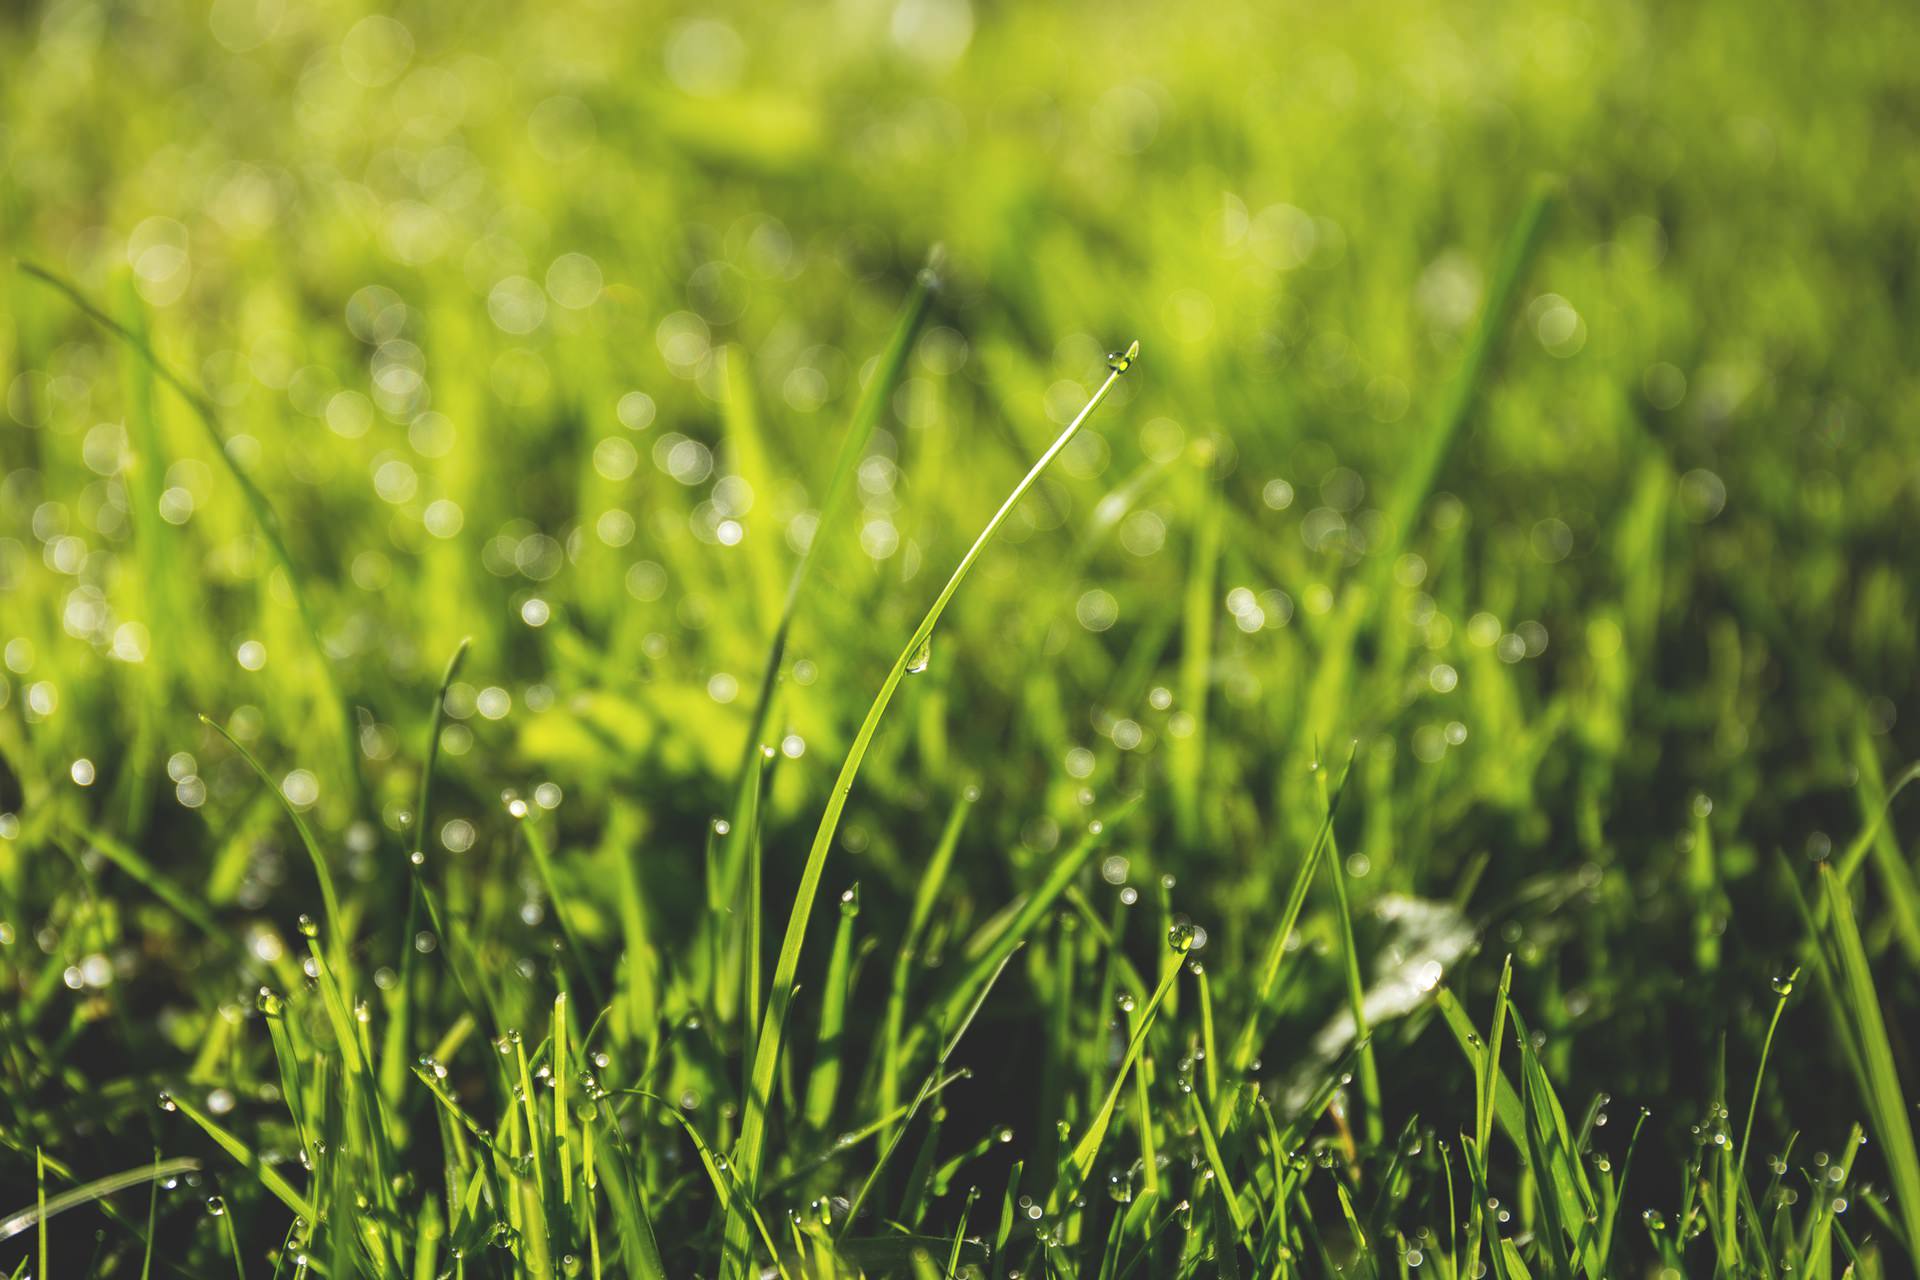 Taking Care of Your Missouri Lawn Without Wasting Resources